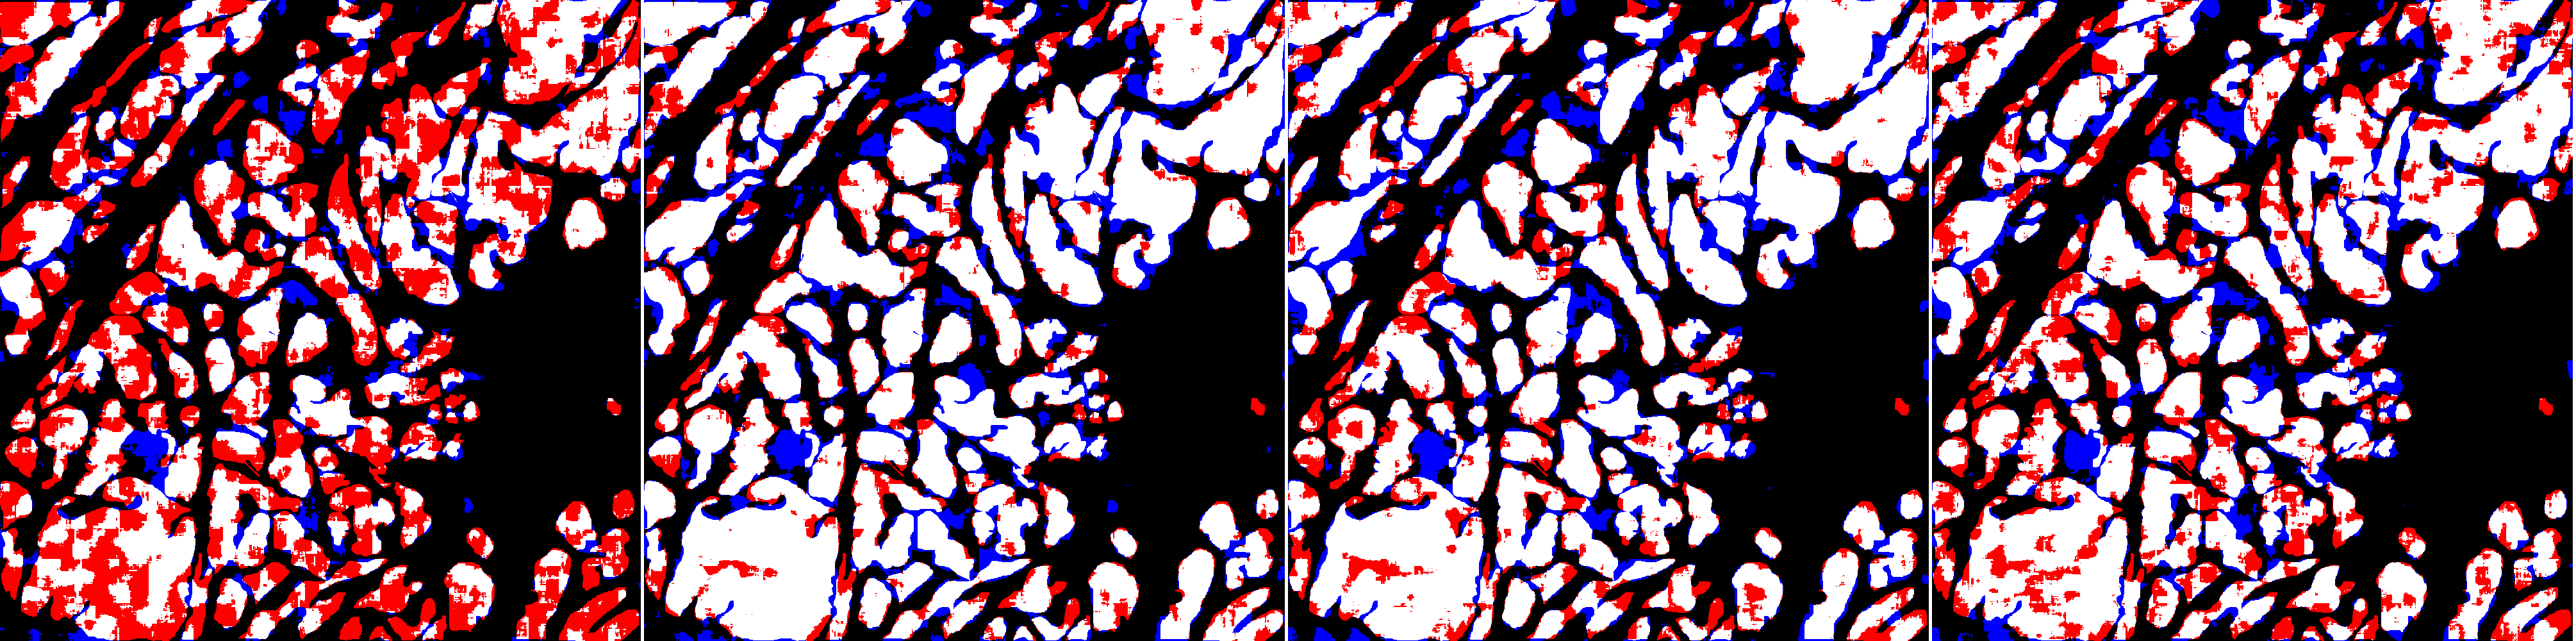 Results on a test slide for ShortRes networks trained with the noisy dataset and different learning strategies. From left to right: baseline, OnlyP, GA100 and LA. False positive pixels are shown in blue, false negatives in red and correctly segmented areas in white.